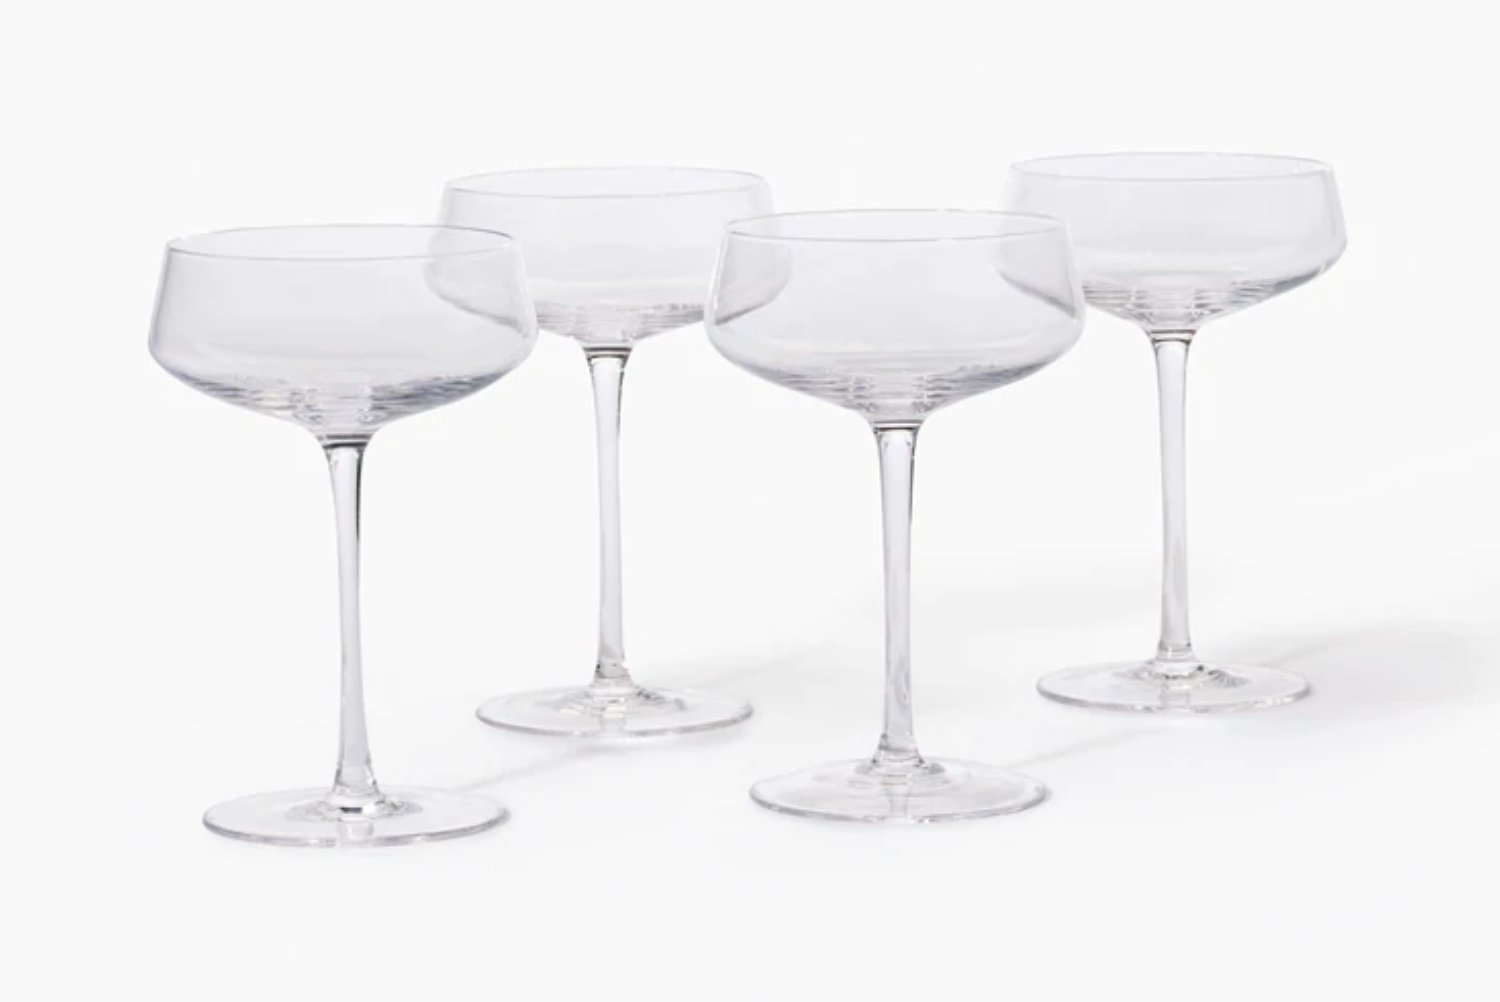 Four coupe glasses